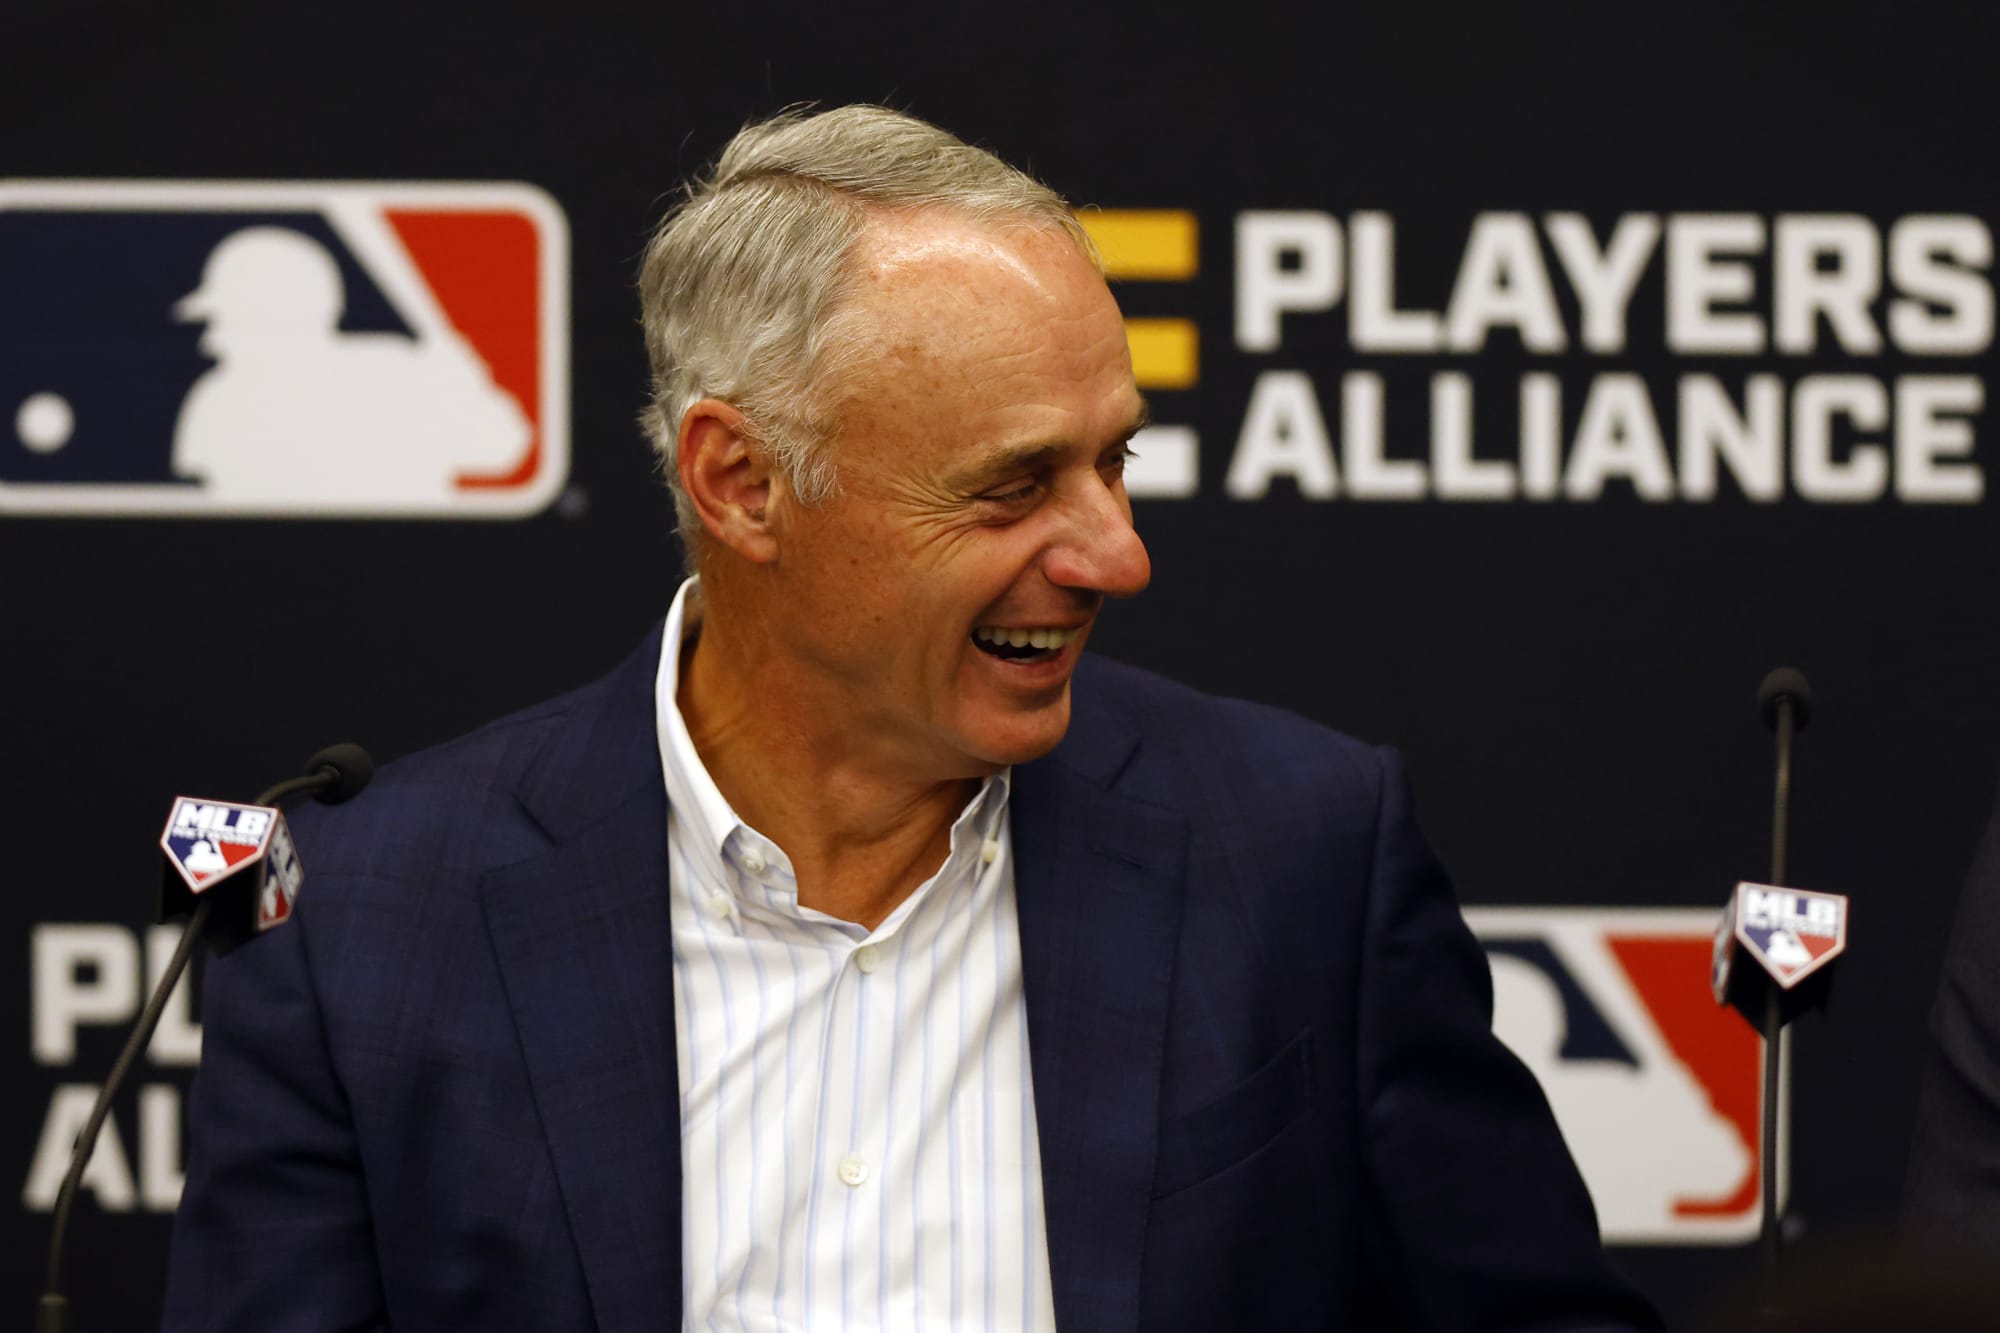 MLB commissioner Rob Manfred on 7-inning doubleheaders